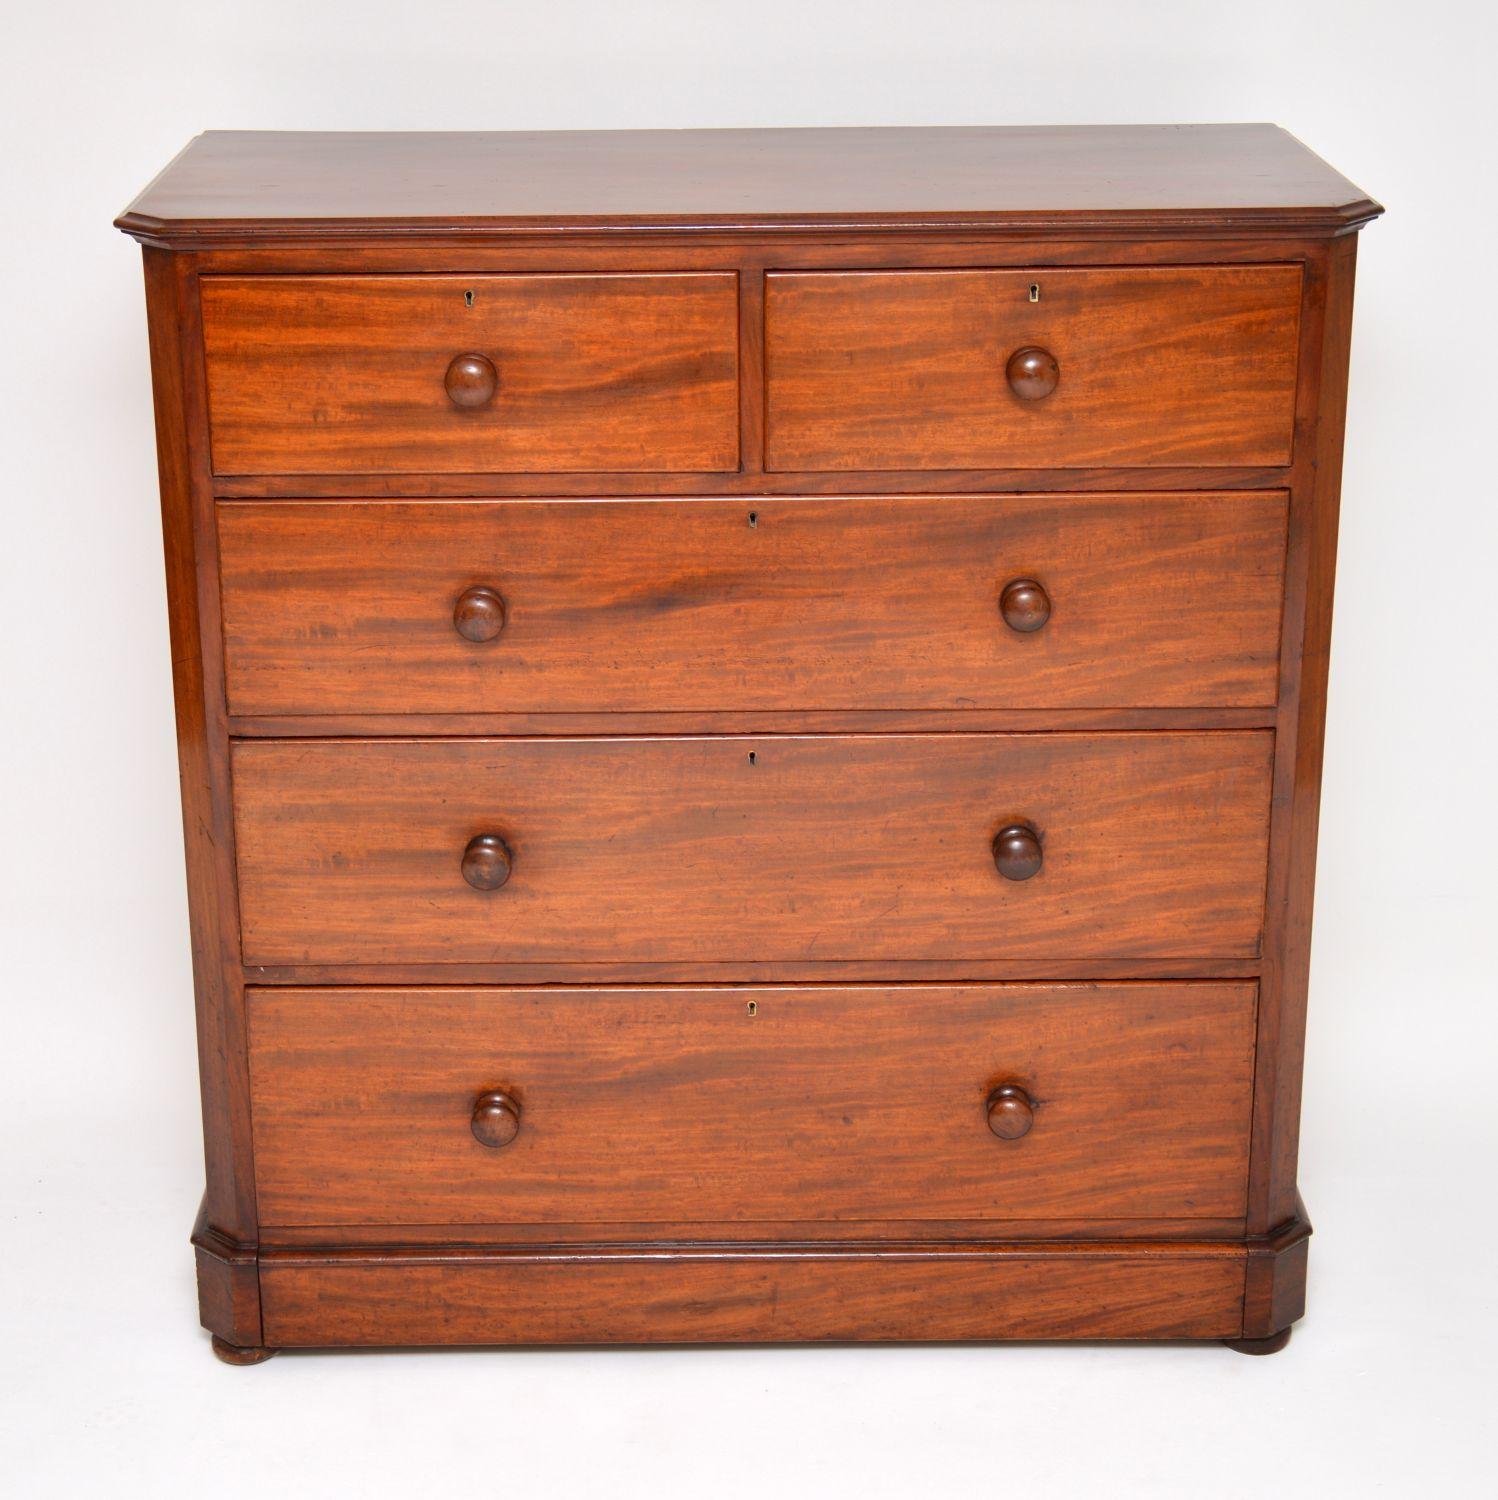 This large antique early Victorian mahogany chest of drawers is of very high quality and is in excellent original condition. The top two drawers have a very unusual and useful feature of double compartments in the form of sliding drawer trays